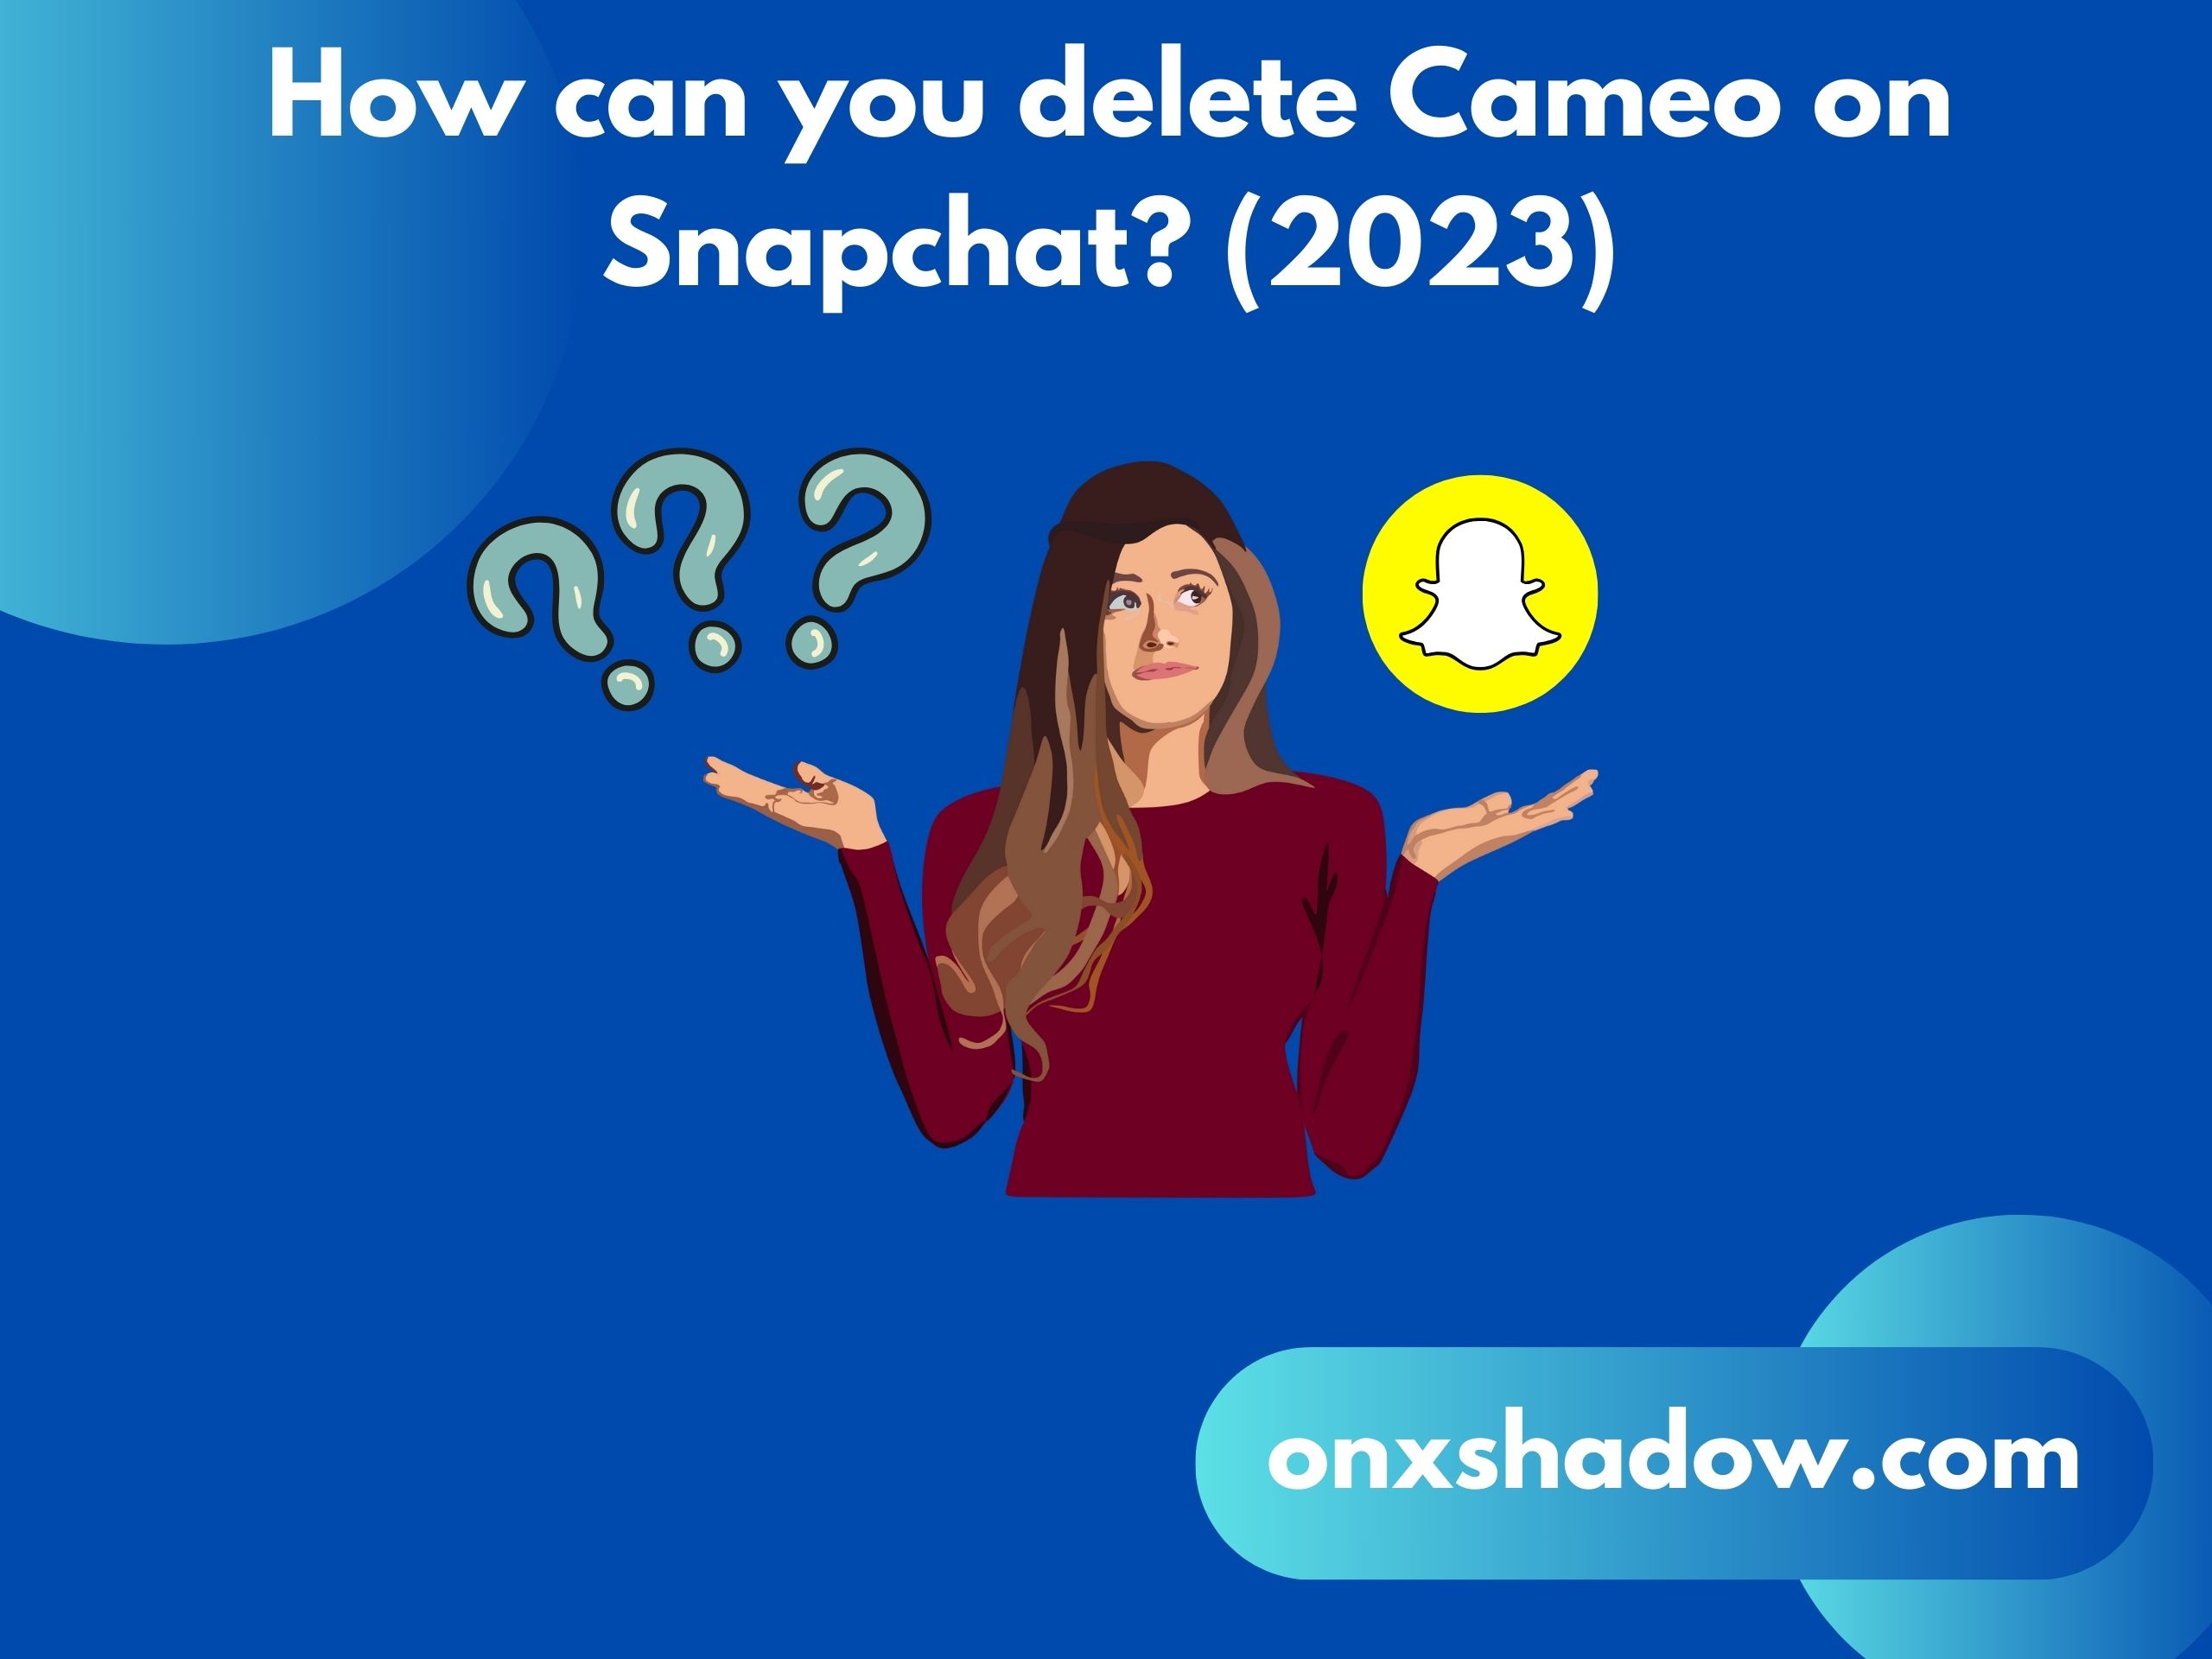 How can you delete Cameo on Snapchat? (2023)